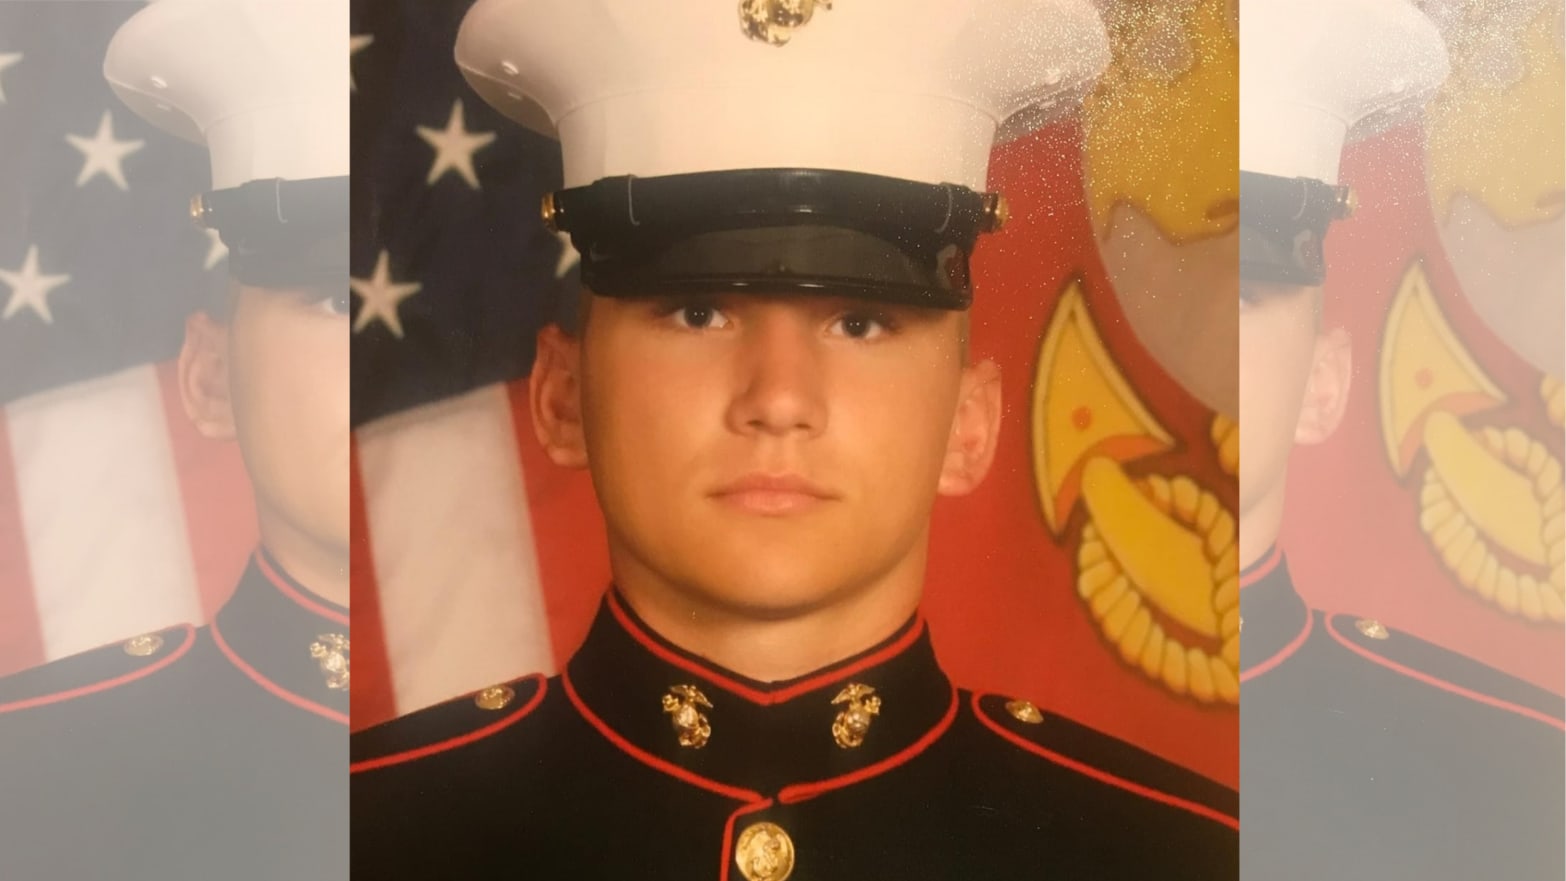 Active-Duty Marine Travis Owens Plotted to Bomb DNC, Murder Black People, Feds